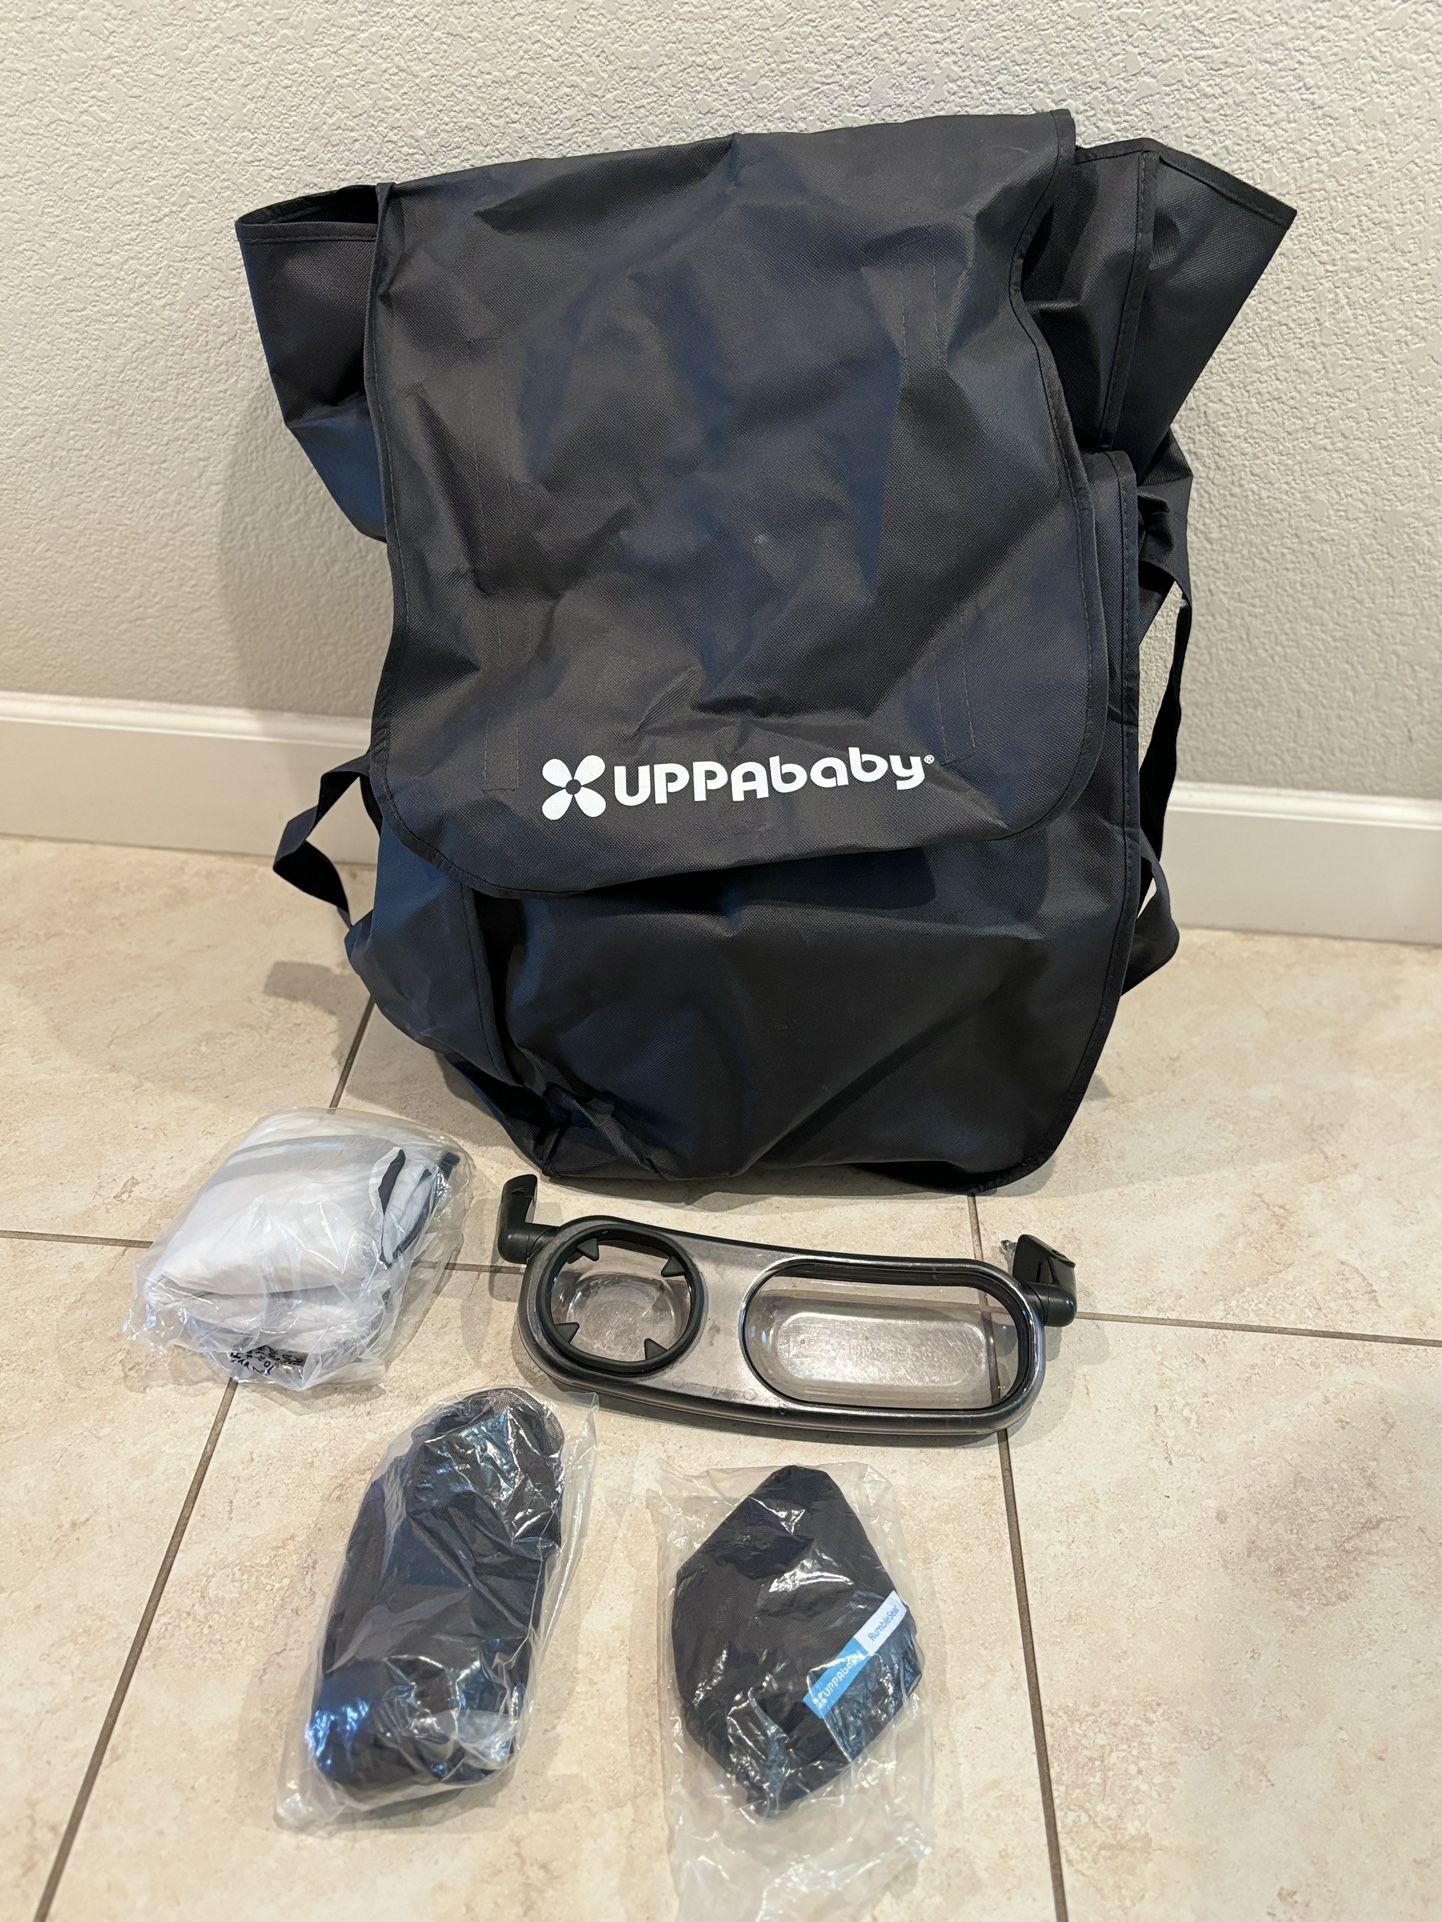 Uppababy Vista double stroller